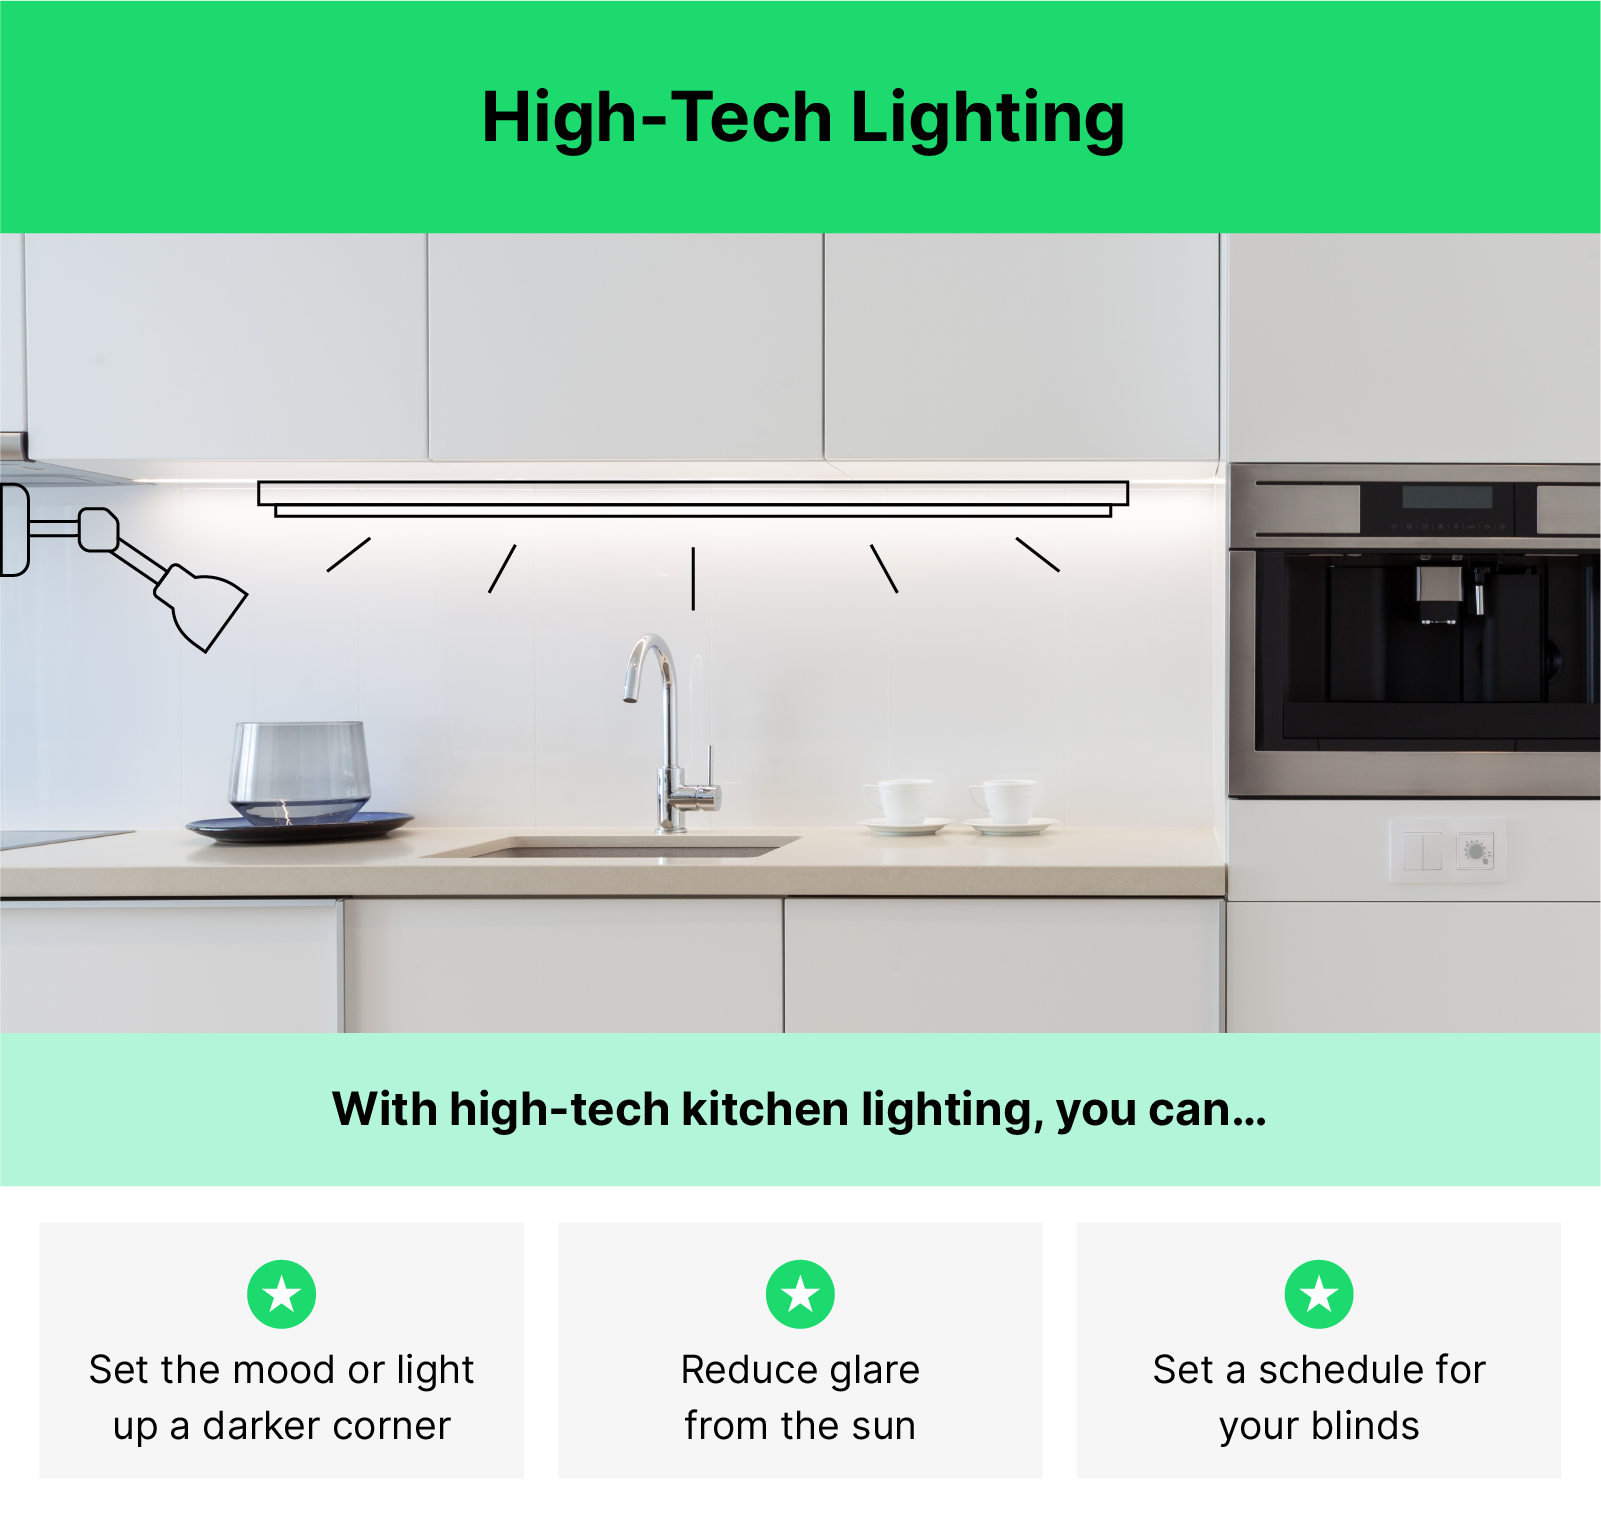 An image of a countertop with high tech lighting features in the cabinet above